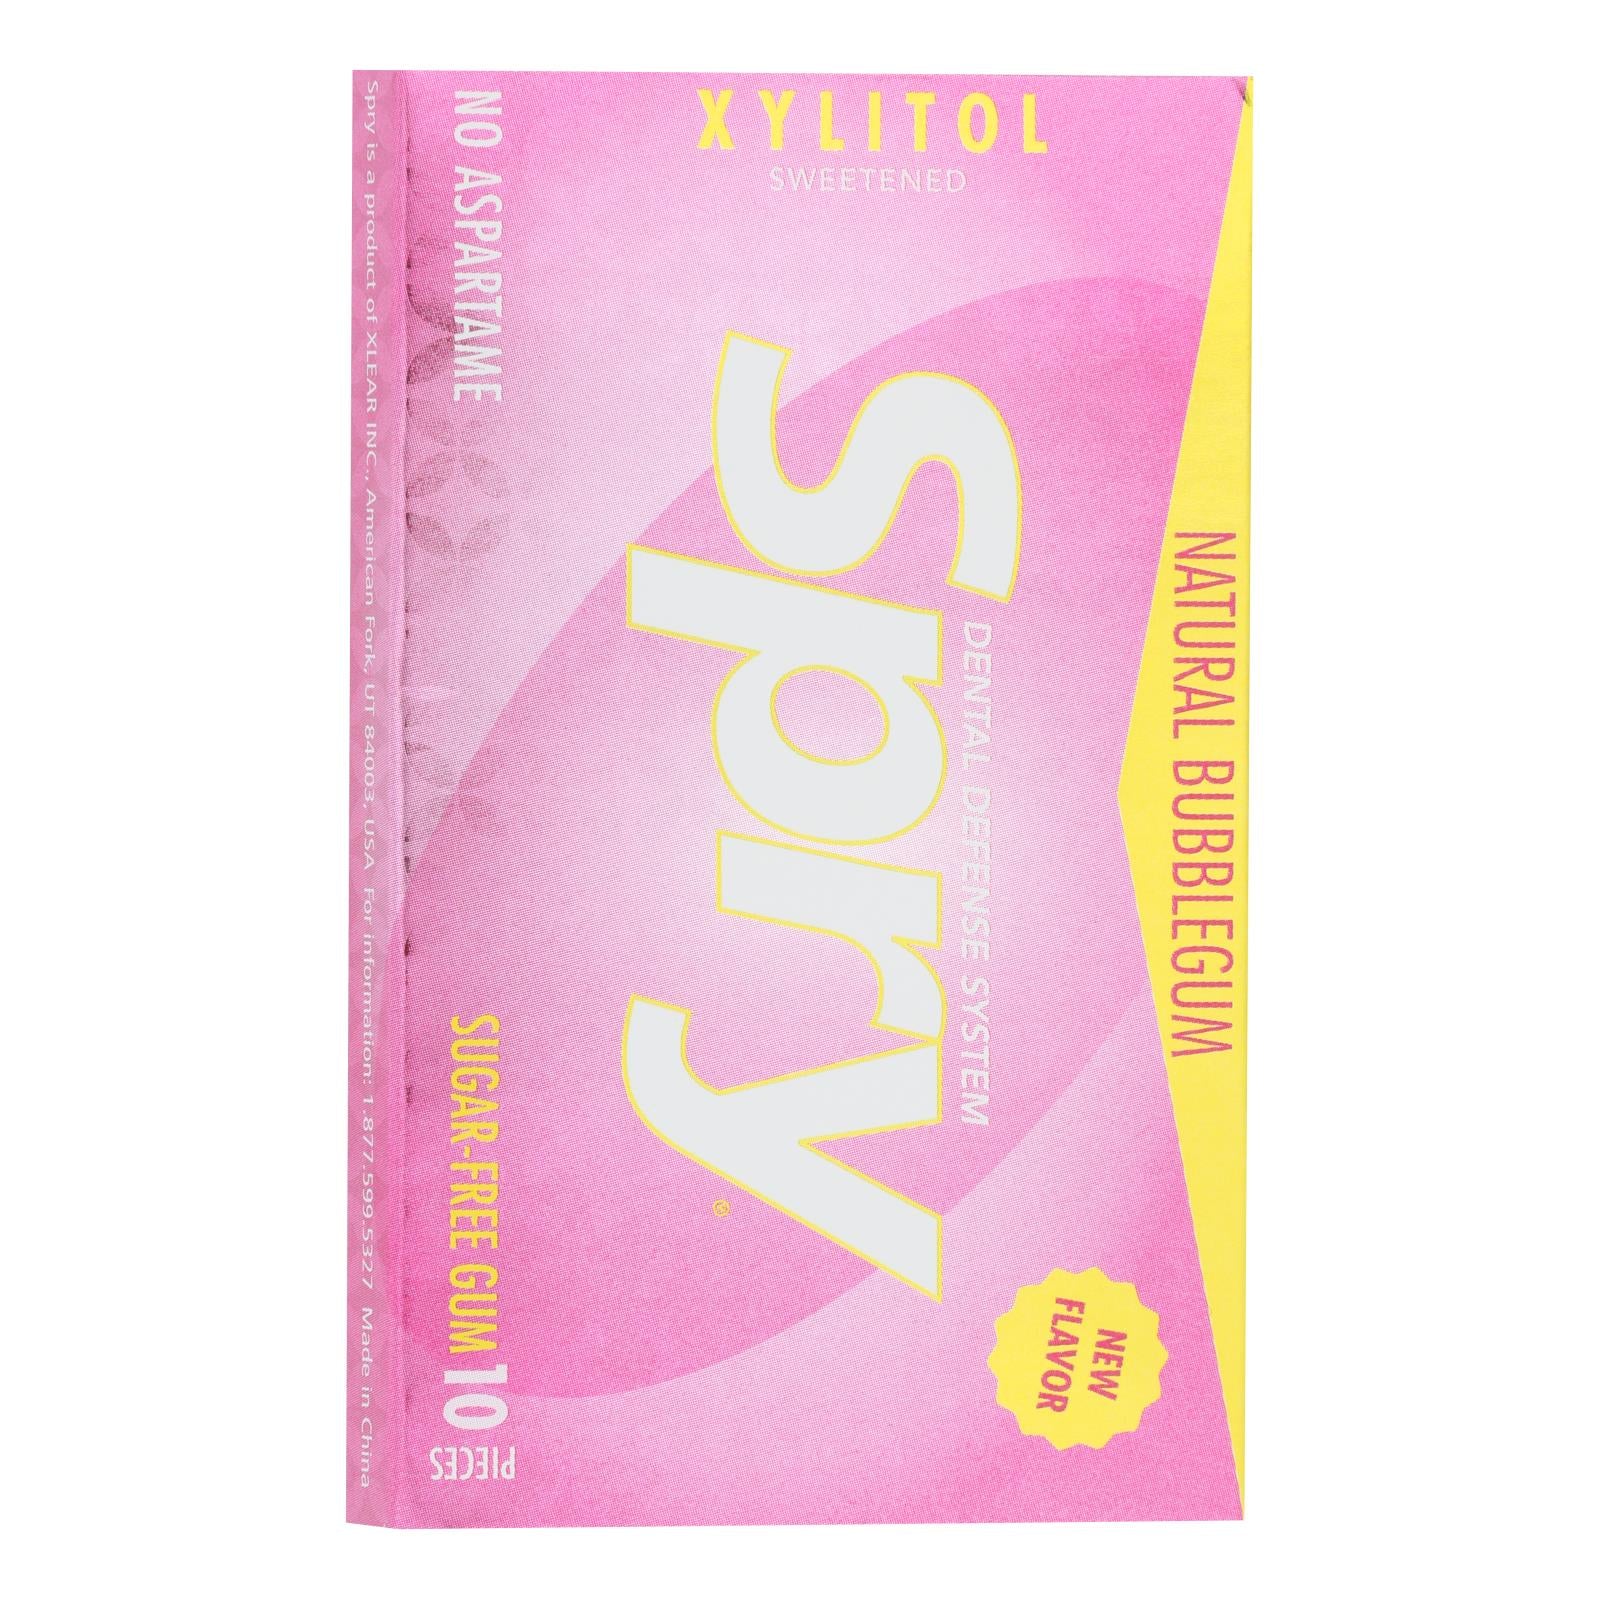 Spry - Chewing Gum Bubble Gum - Case Of 20 - 10 Ct